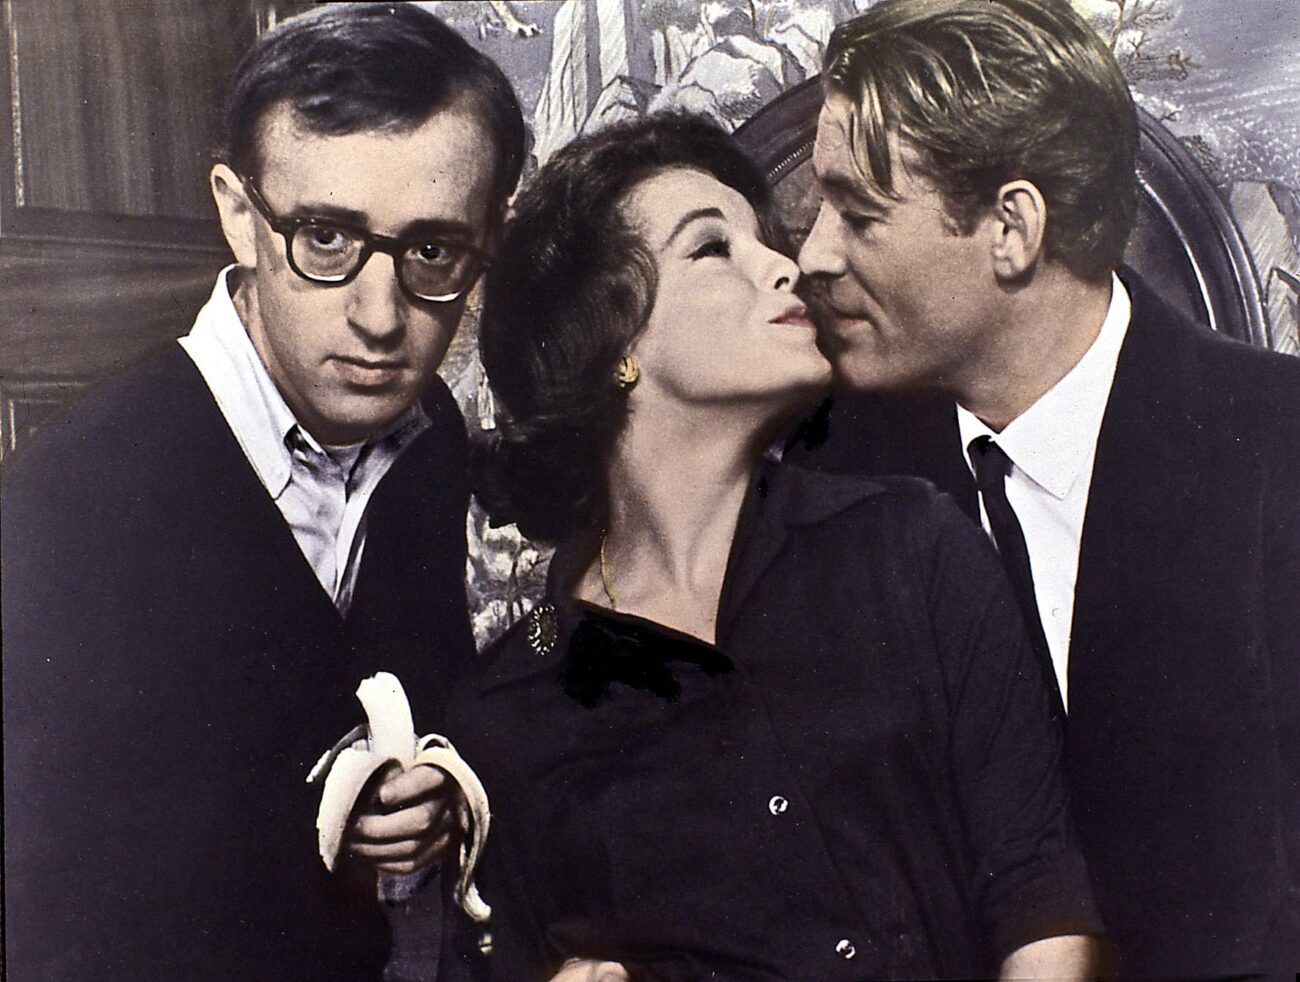 what's new pussycat woody allen peter o toole